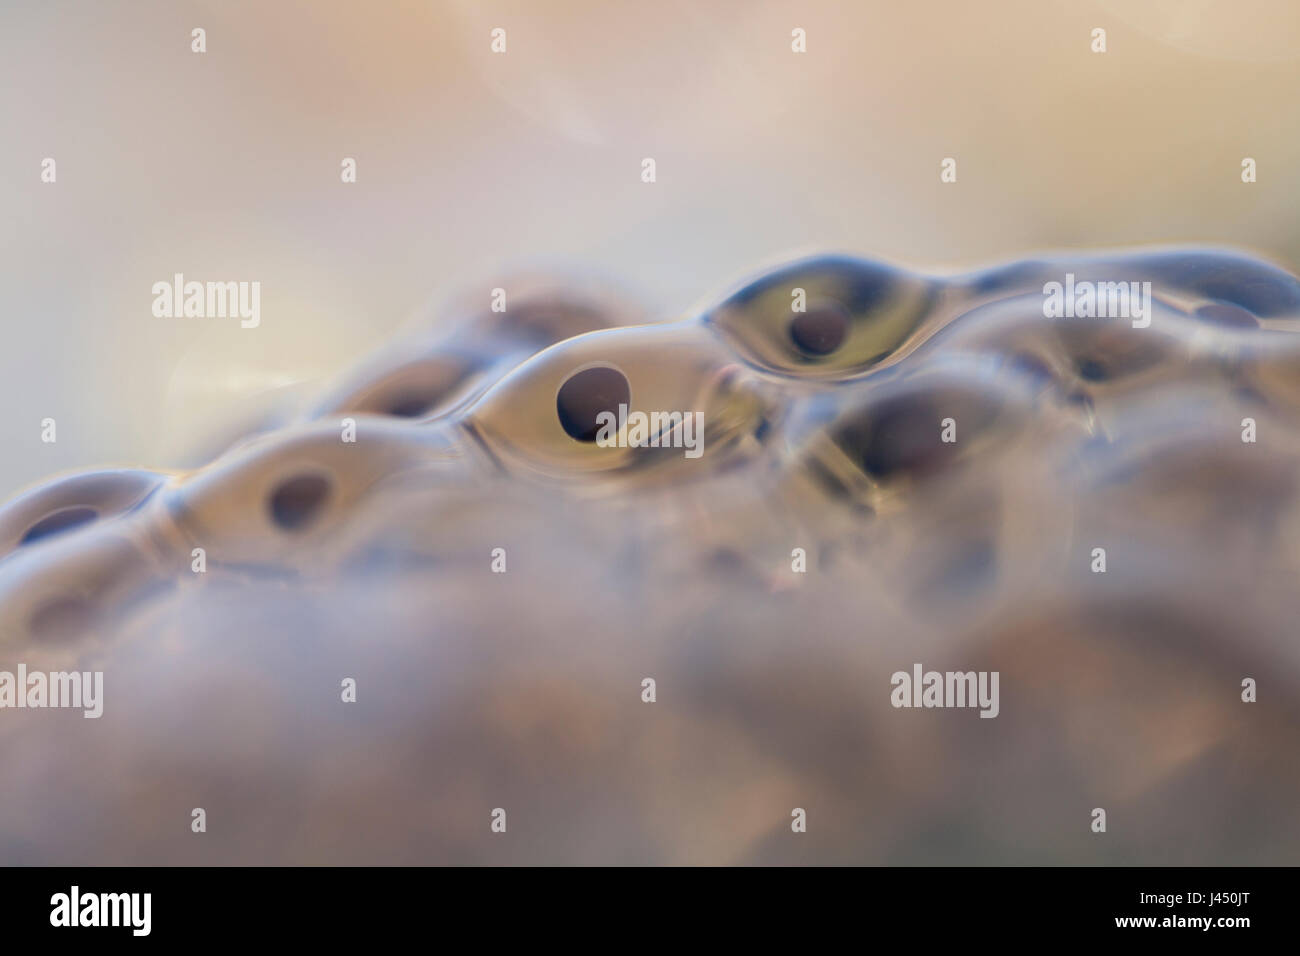 Frog spawn from moor frog Stock Photo